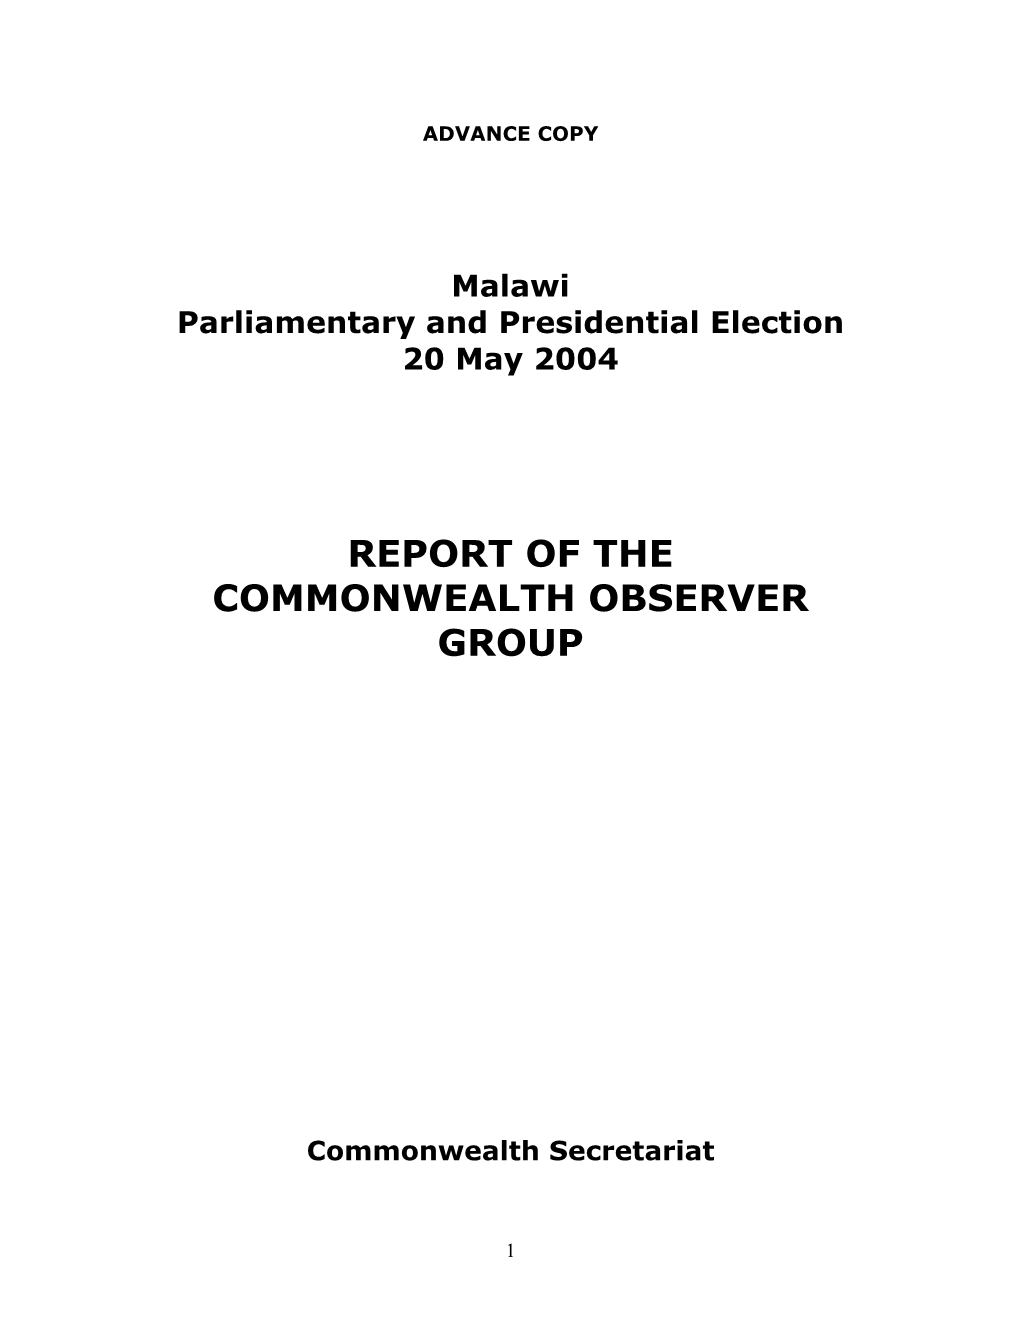 Malawi Parliamentary and Presidential Election 20 May 2004